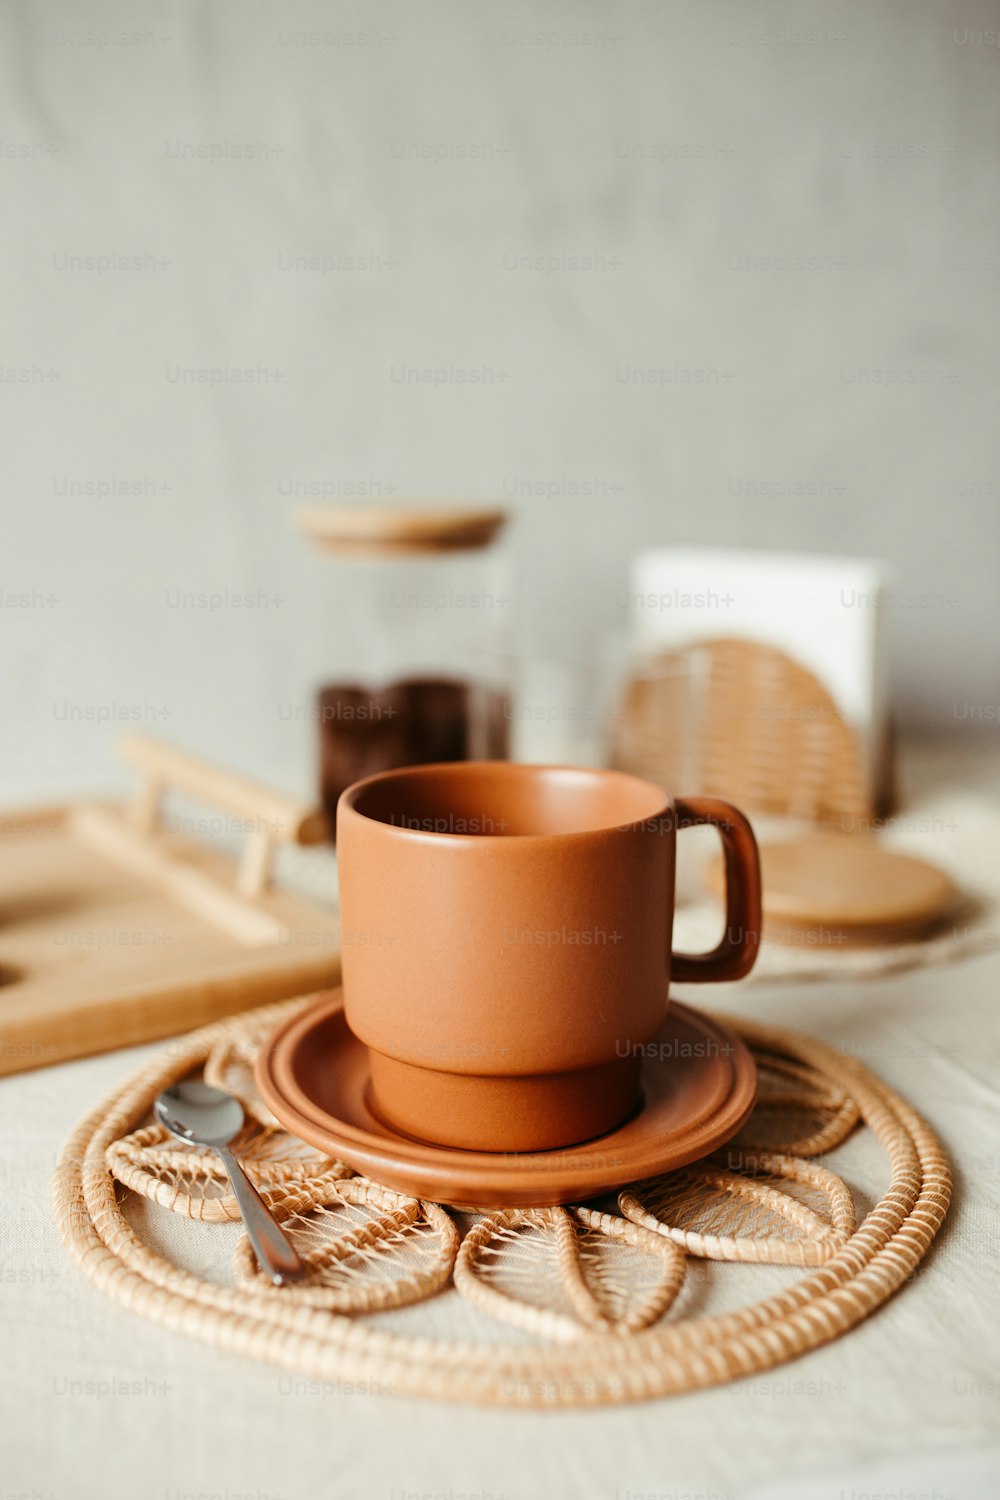 a cup and saucer sitting on a place mat